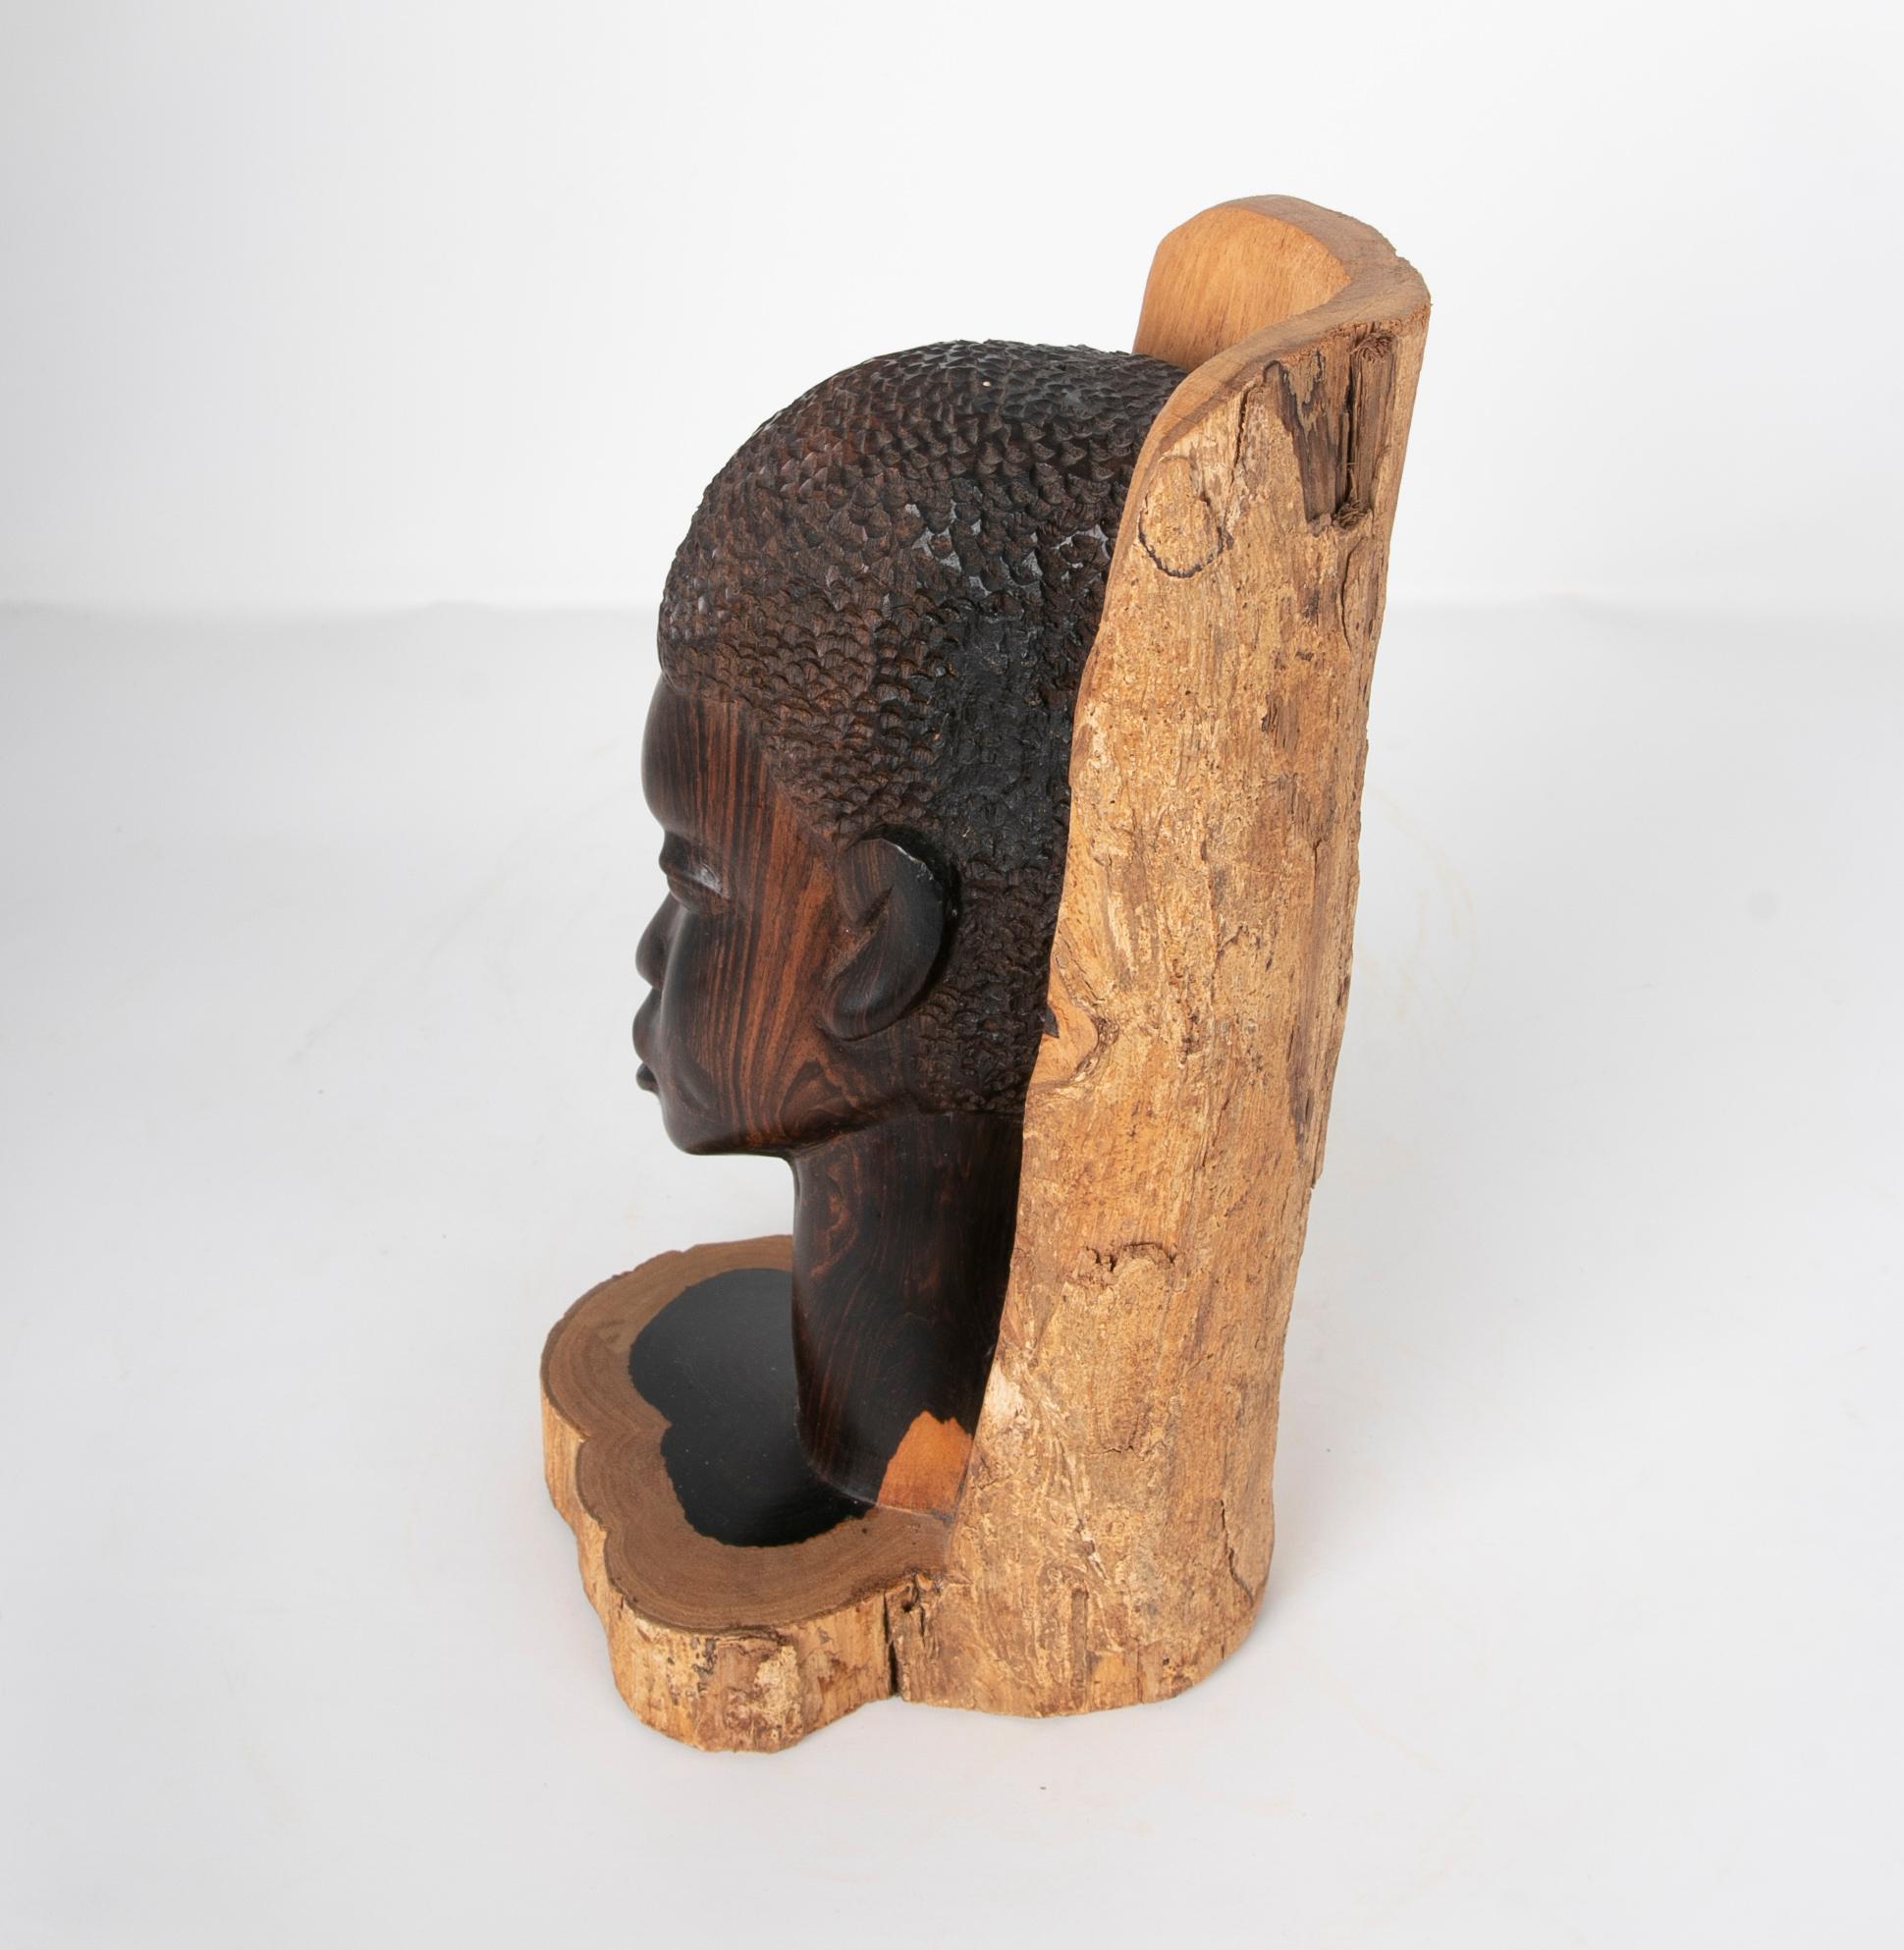 Wood-Carved Sculpture of a Tanzanian Woman Signed and Dated 1922 For Sale 1